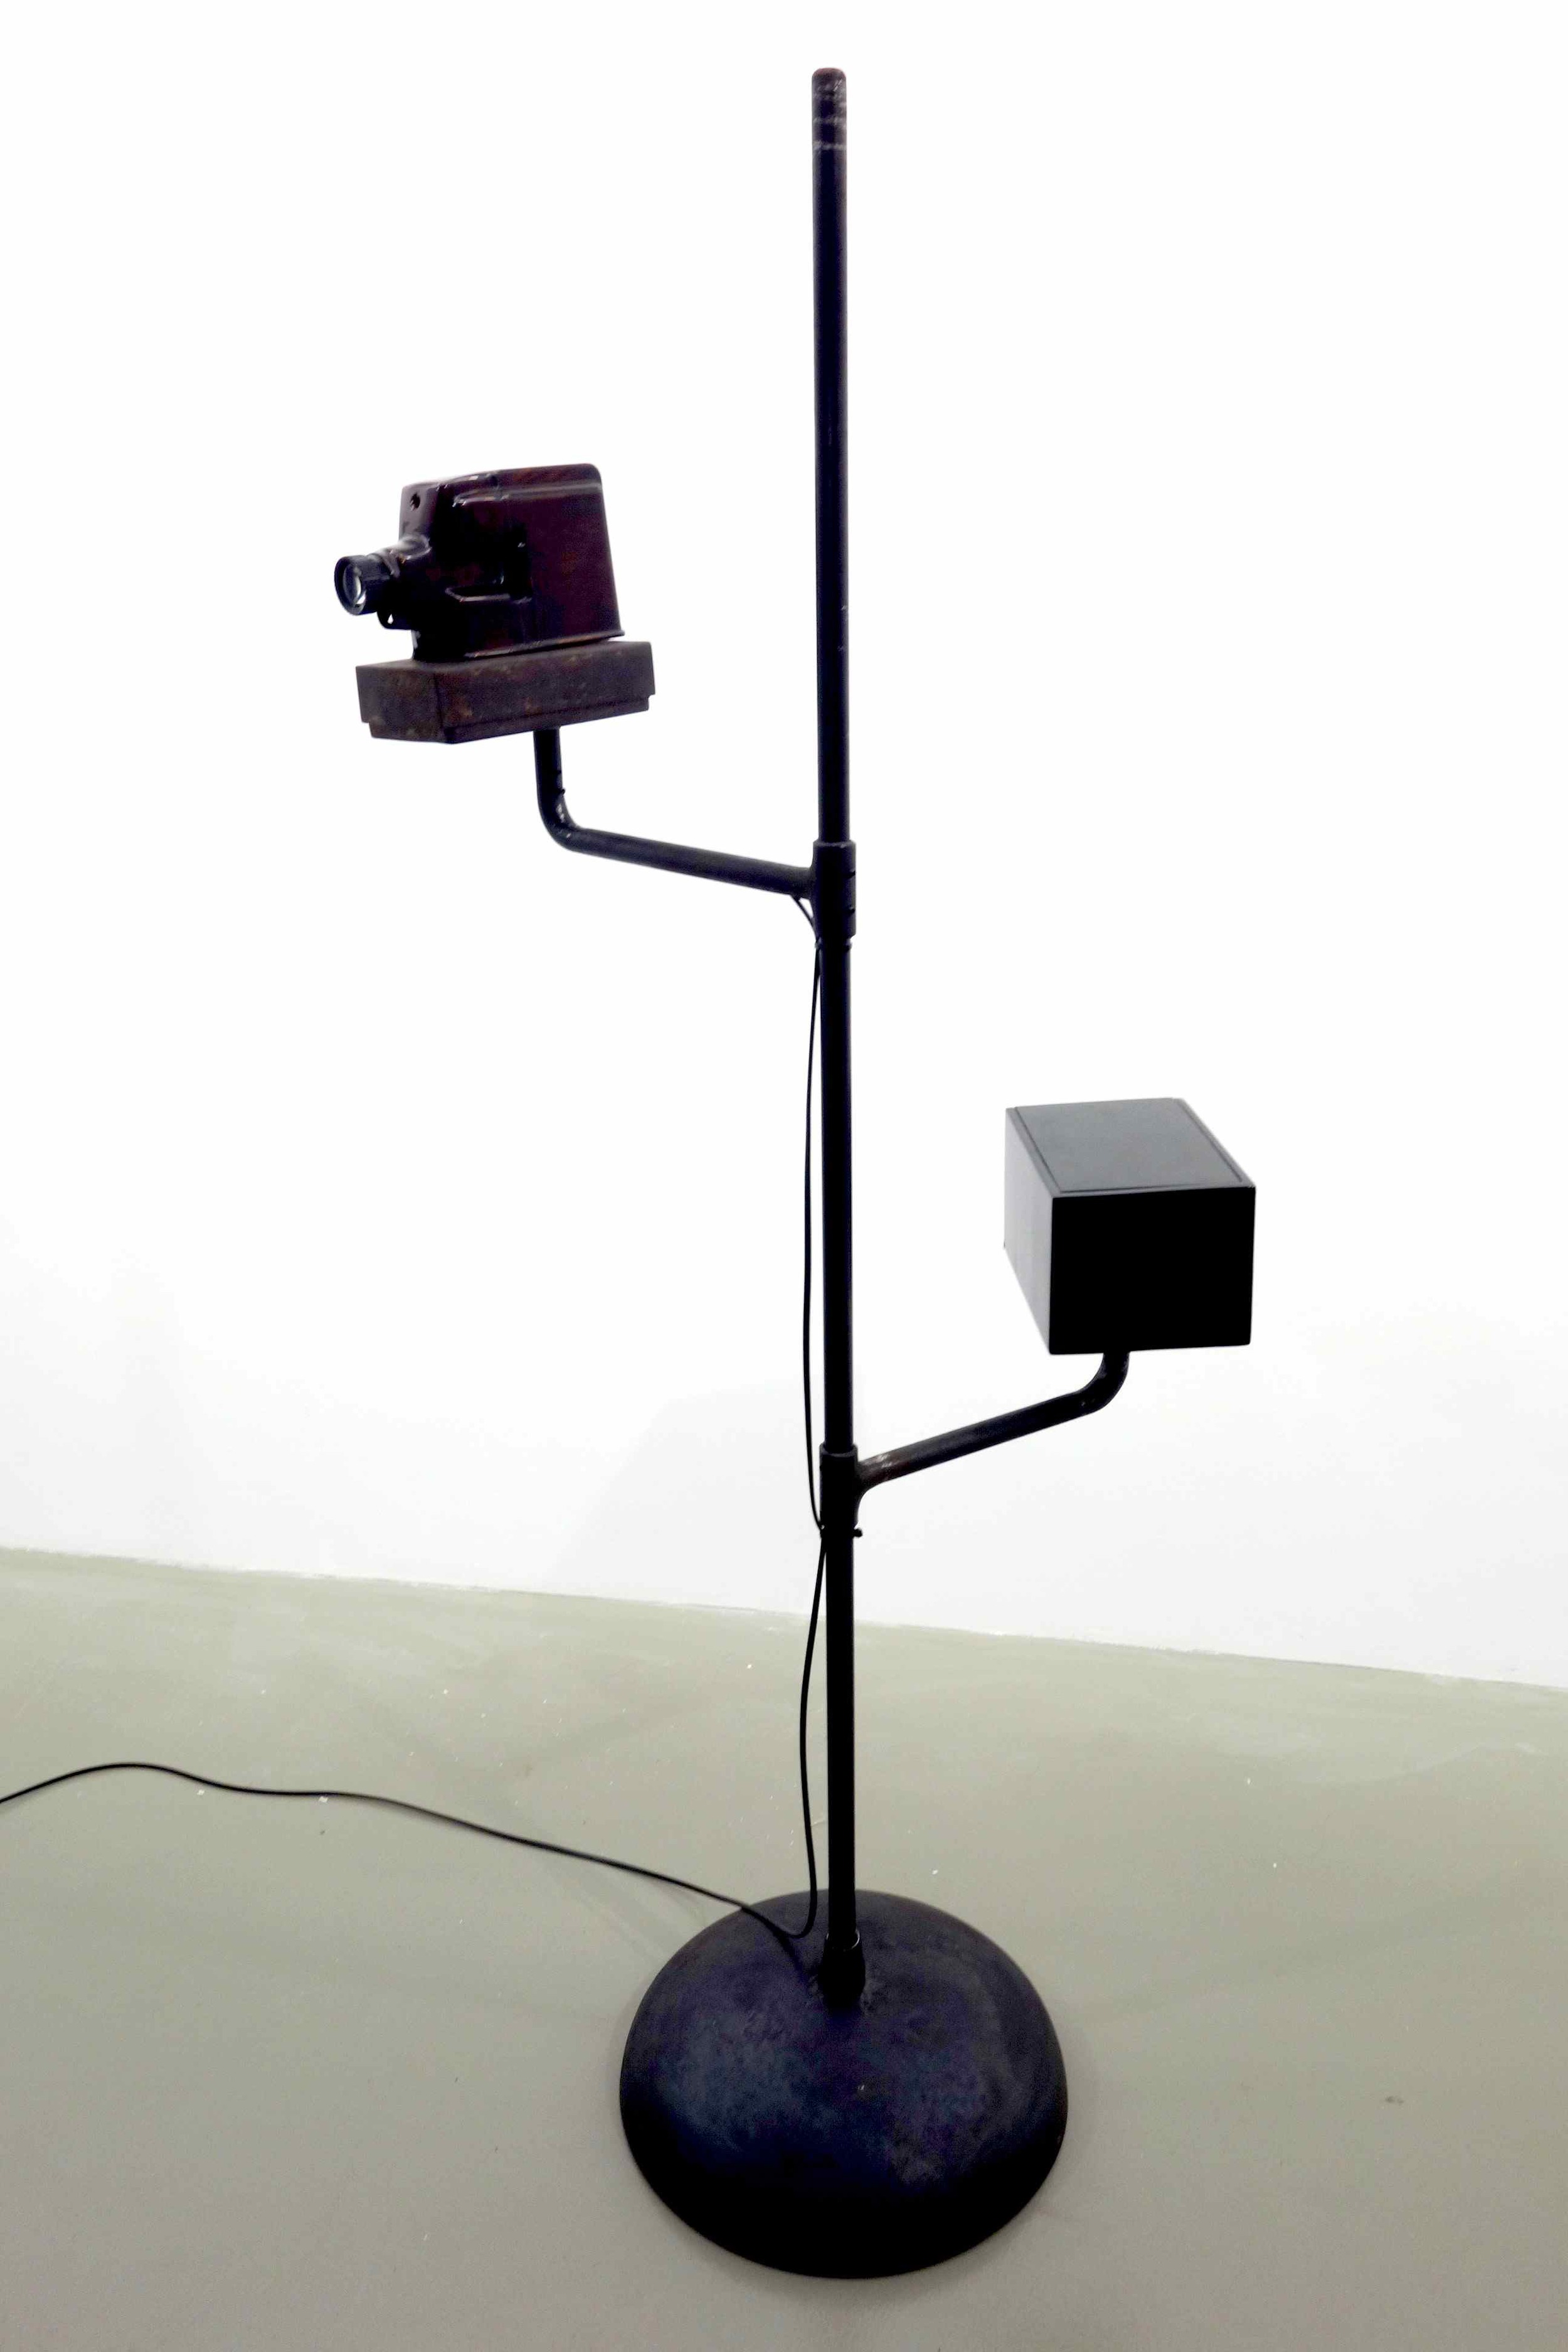   Lacquerscope #6  2014 Son Ta lacquered metal small format (35mm) projector. Iron stand, base and swivel arms 174.5 x 99.3 cm 